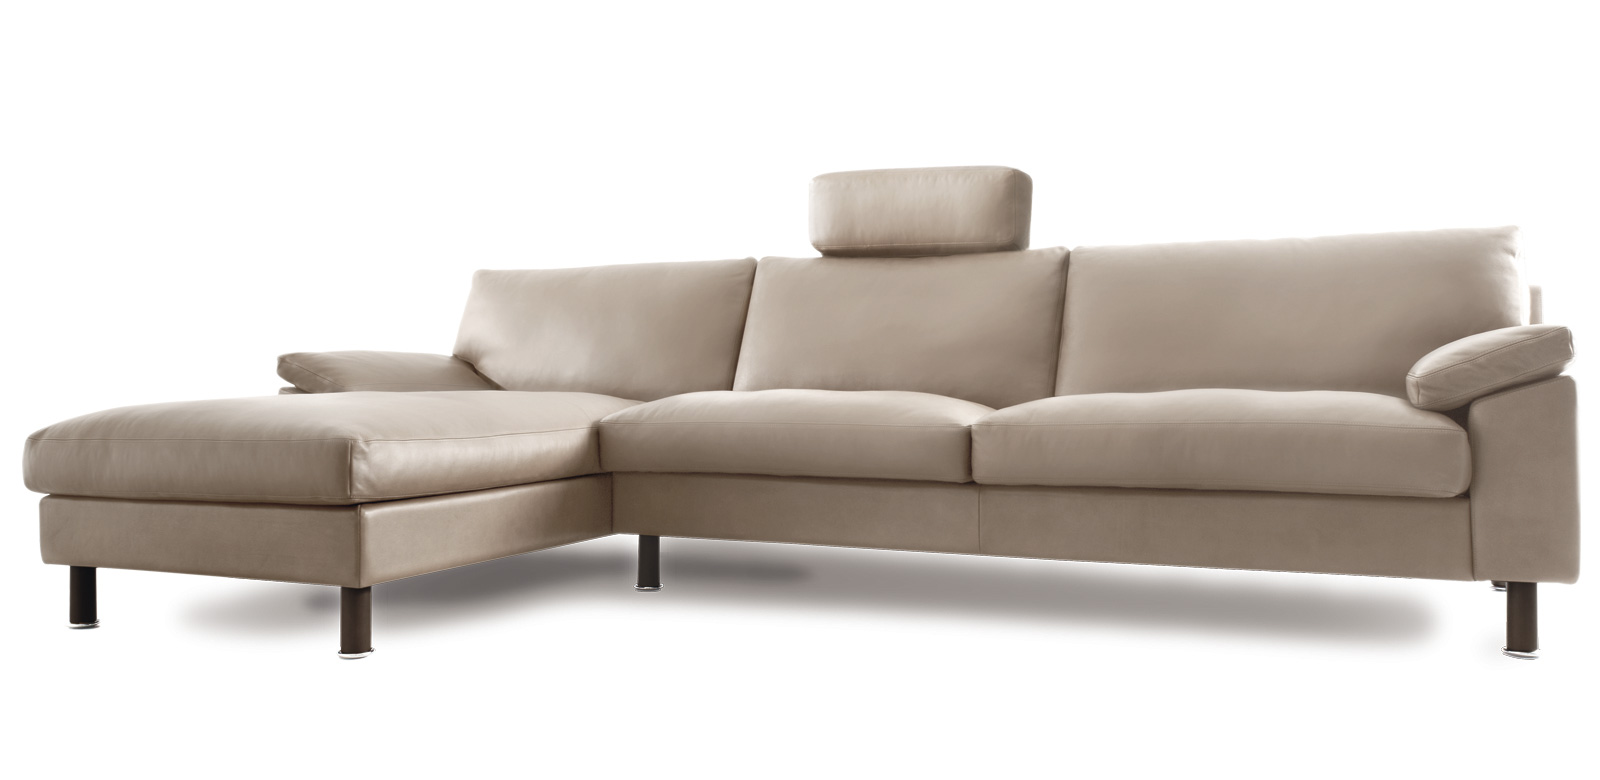 CL650 Longchair Sofa in Beige-White Leather with Centre Headrest